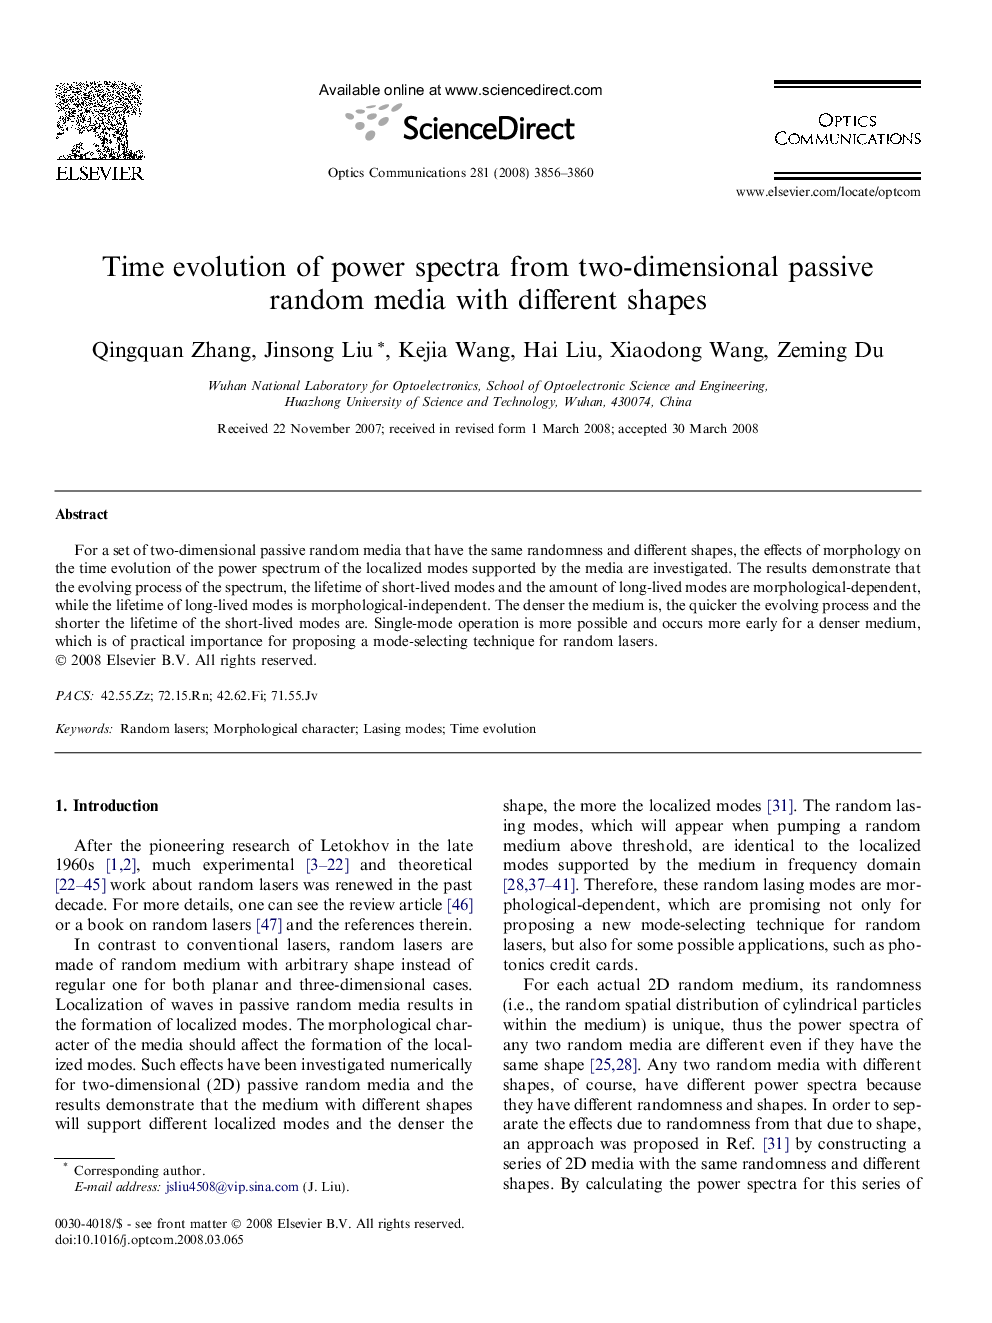 Time evolution of power spectra from two-dimensional passive random media with different shapes